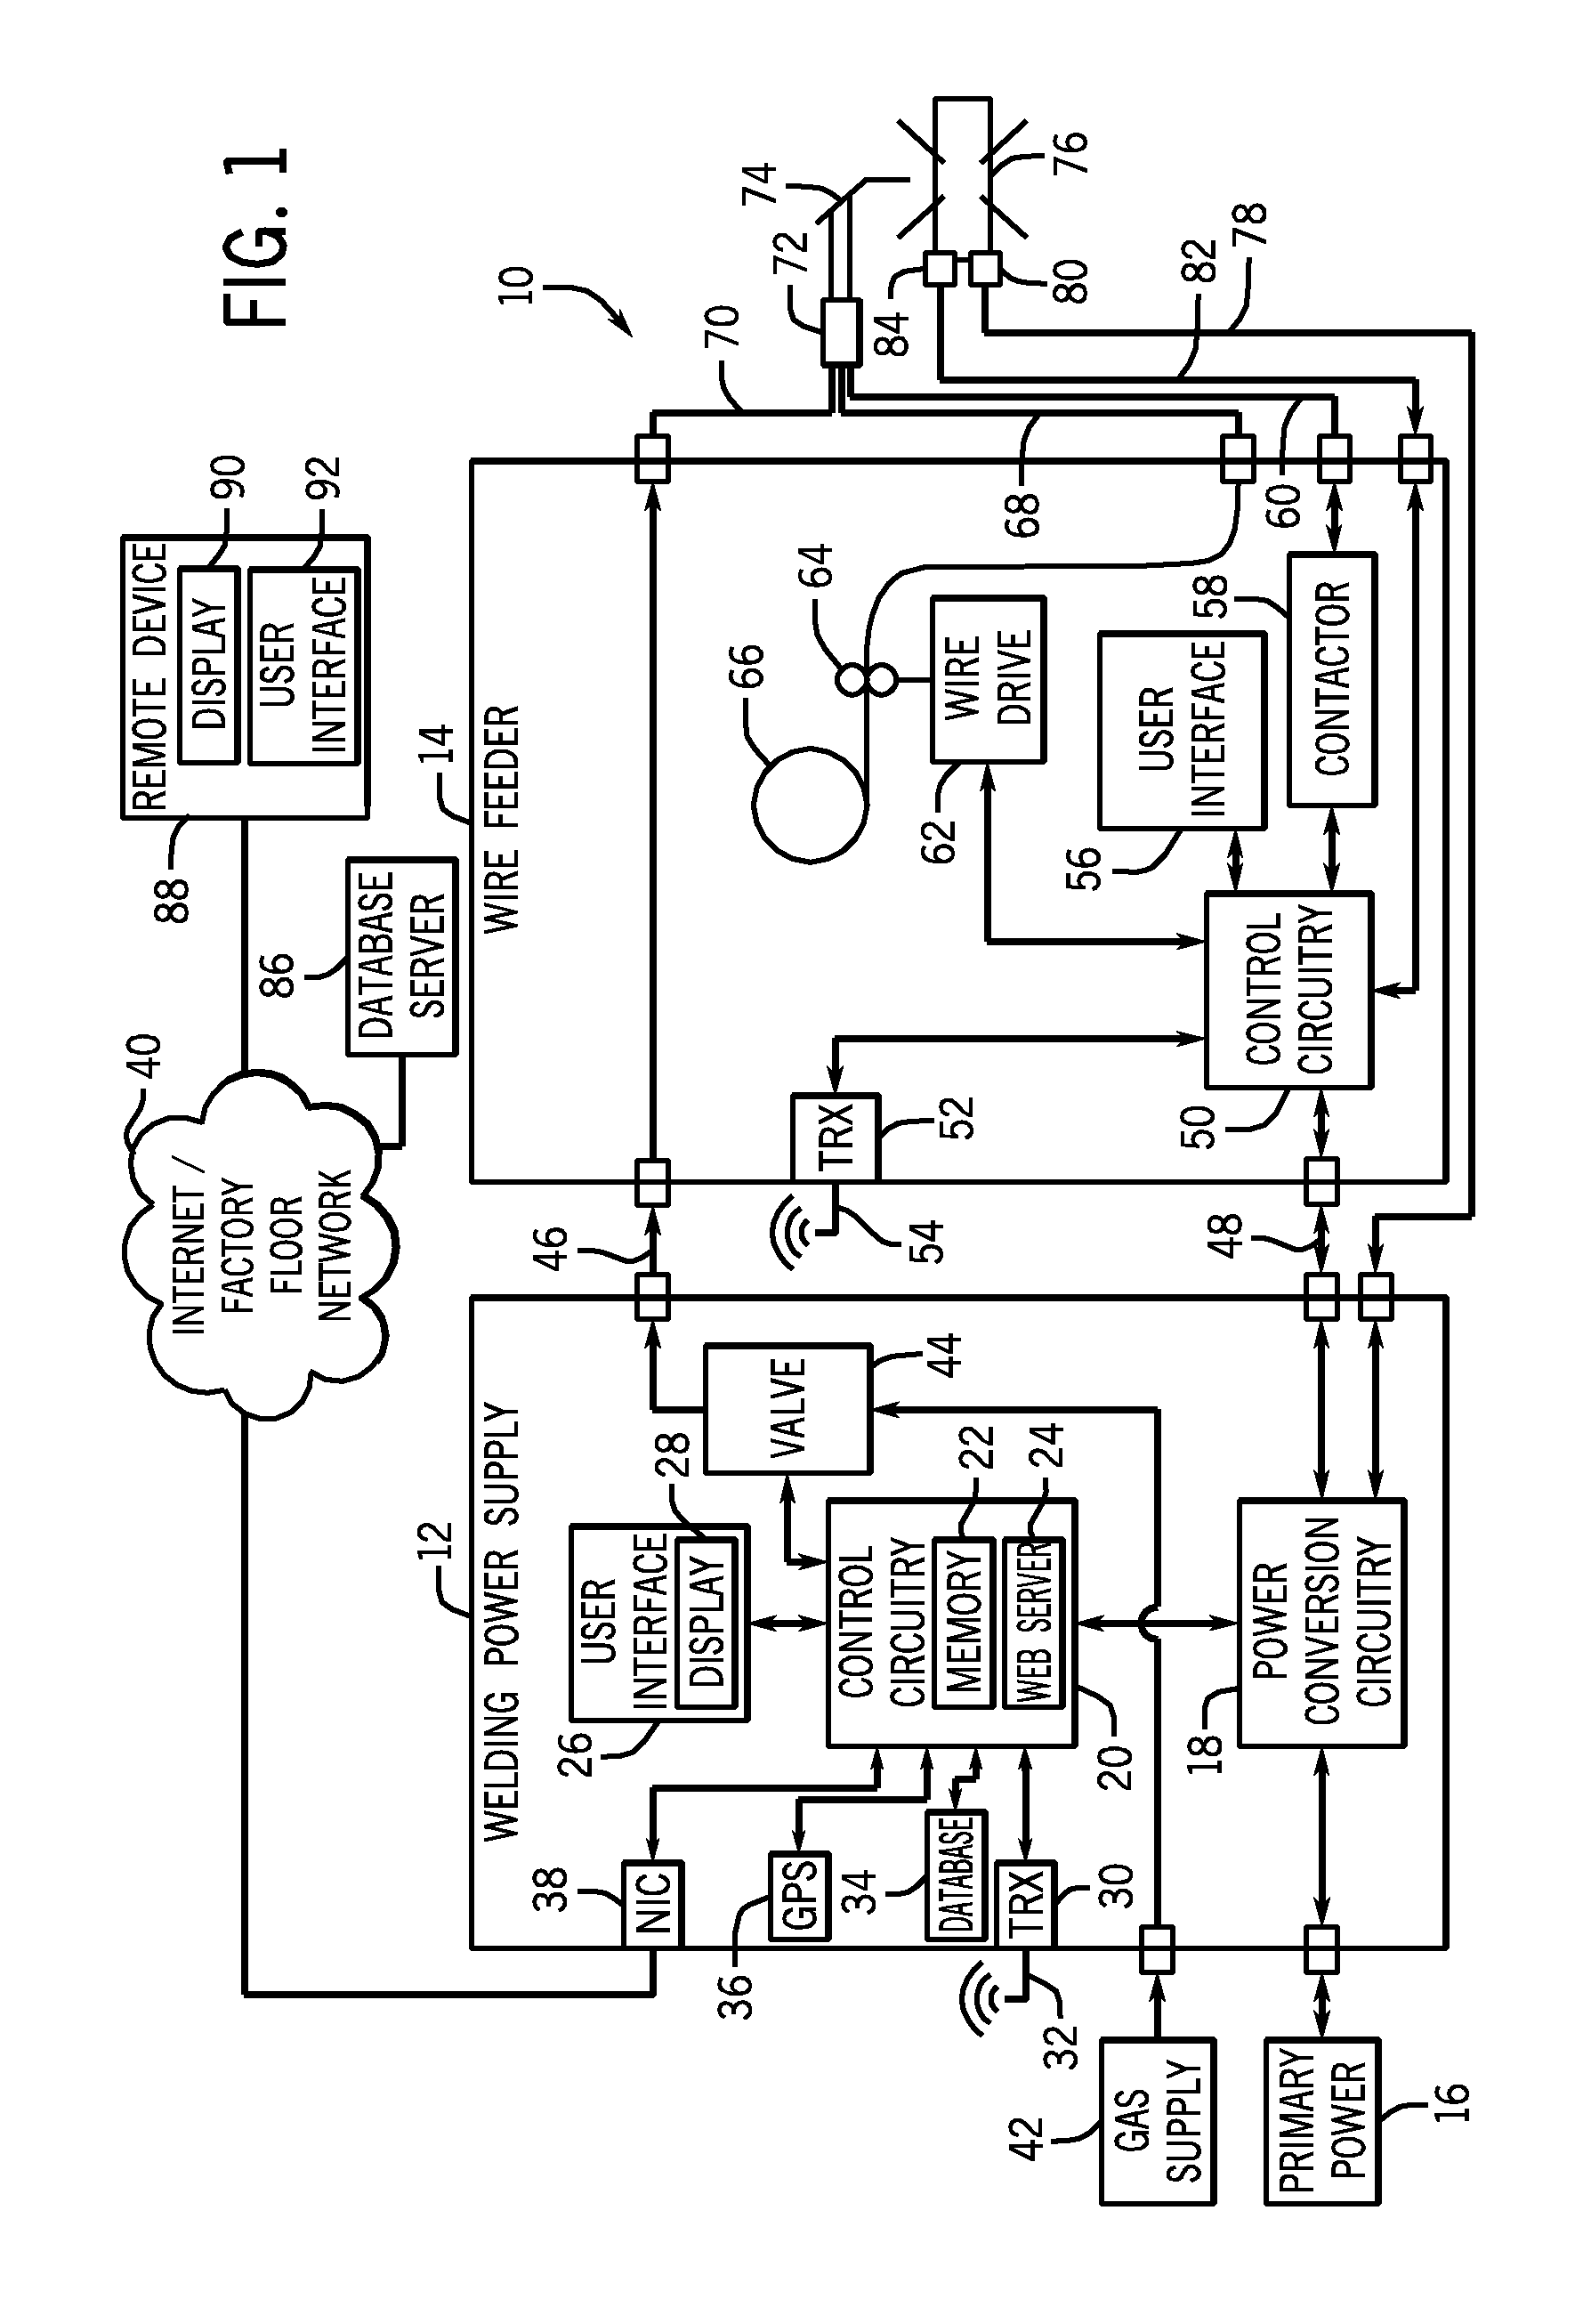 Systems and methods for adjusting multiple settings of a welding power supply